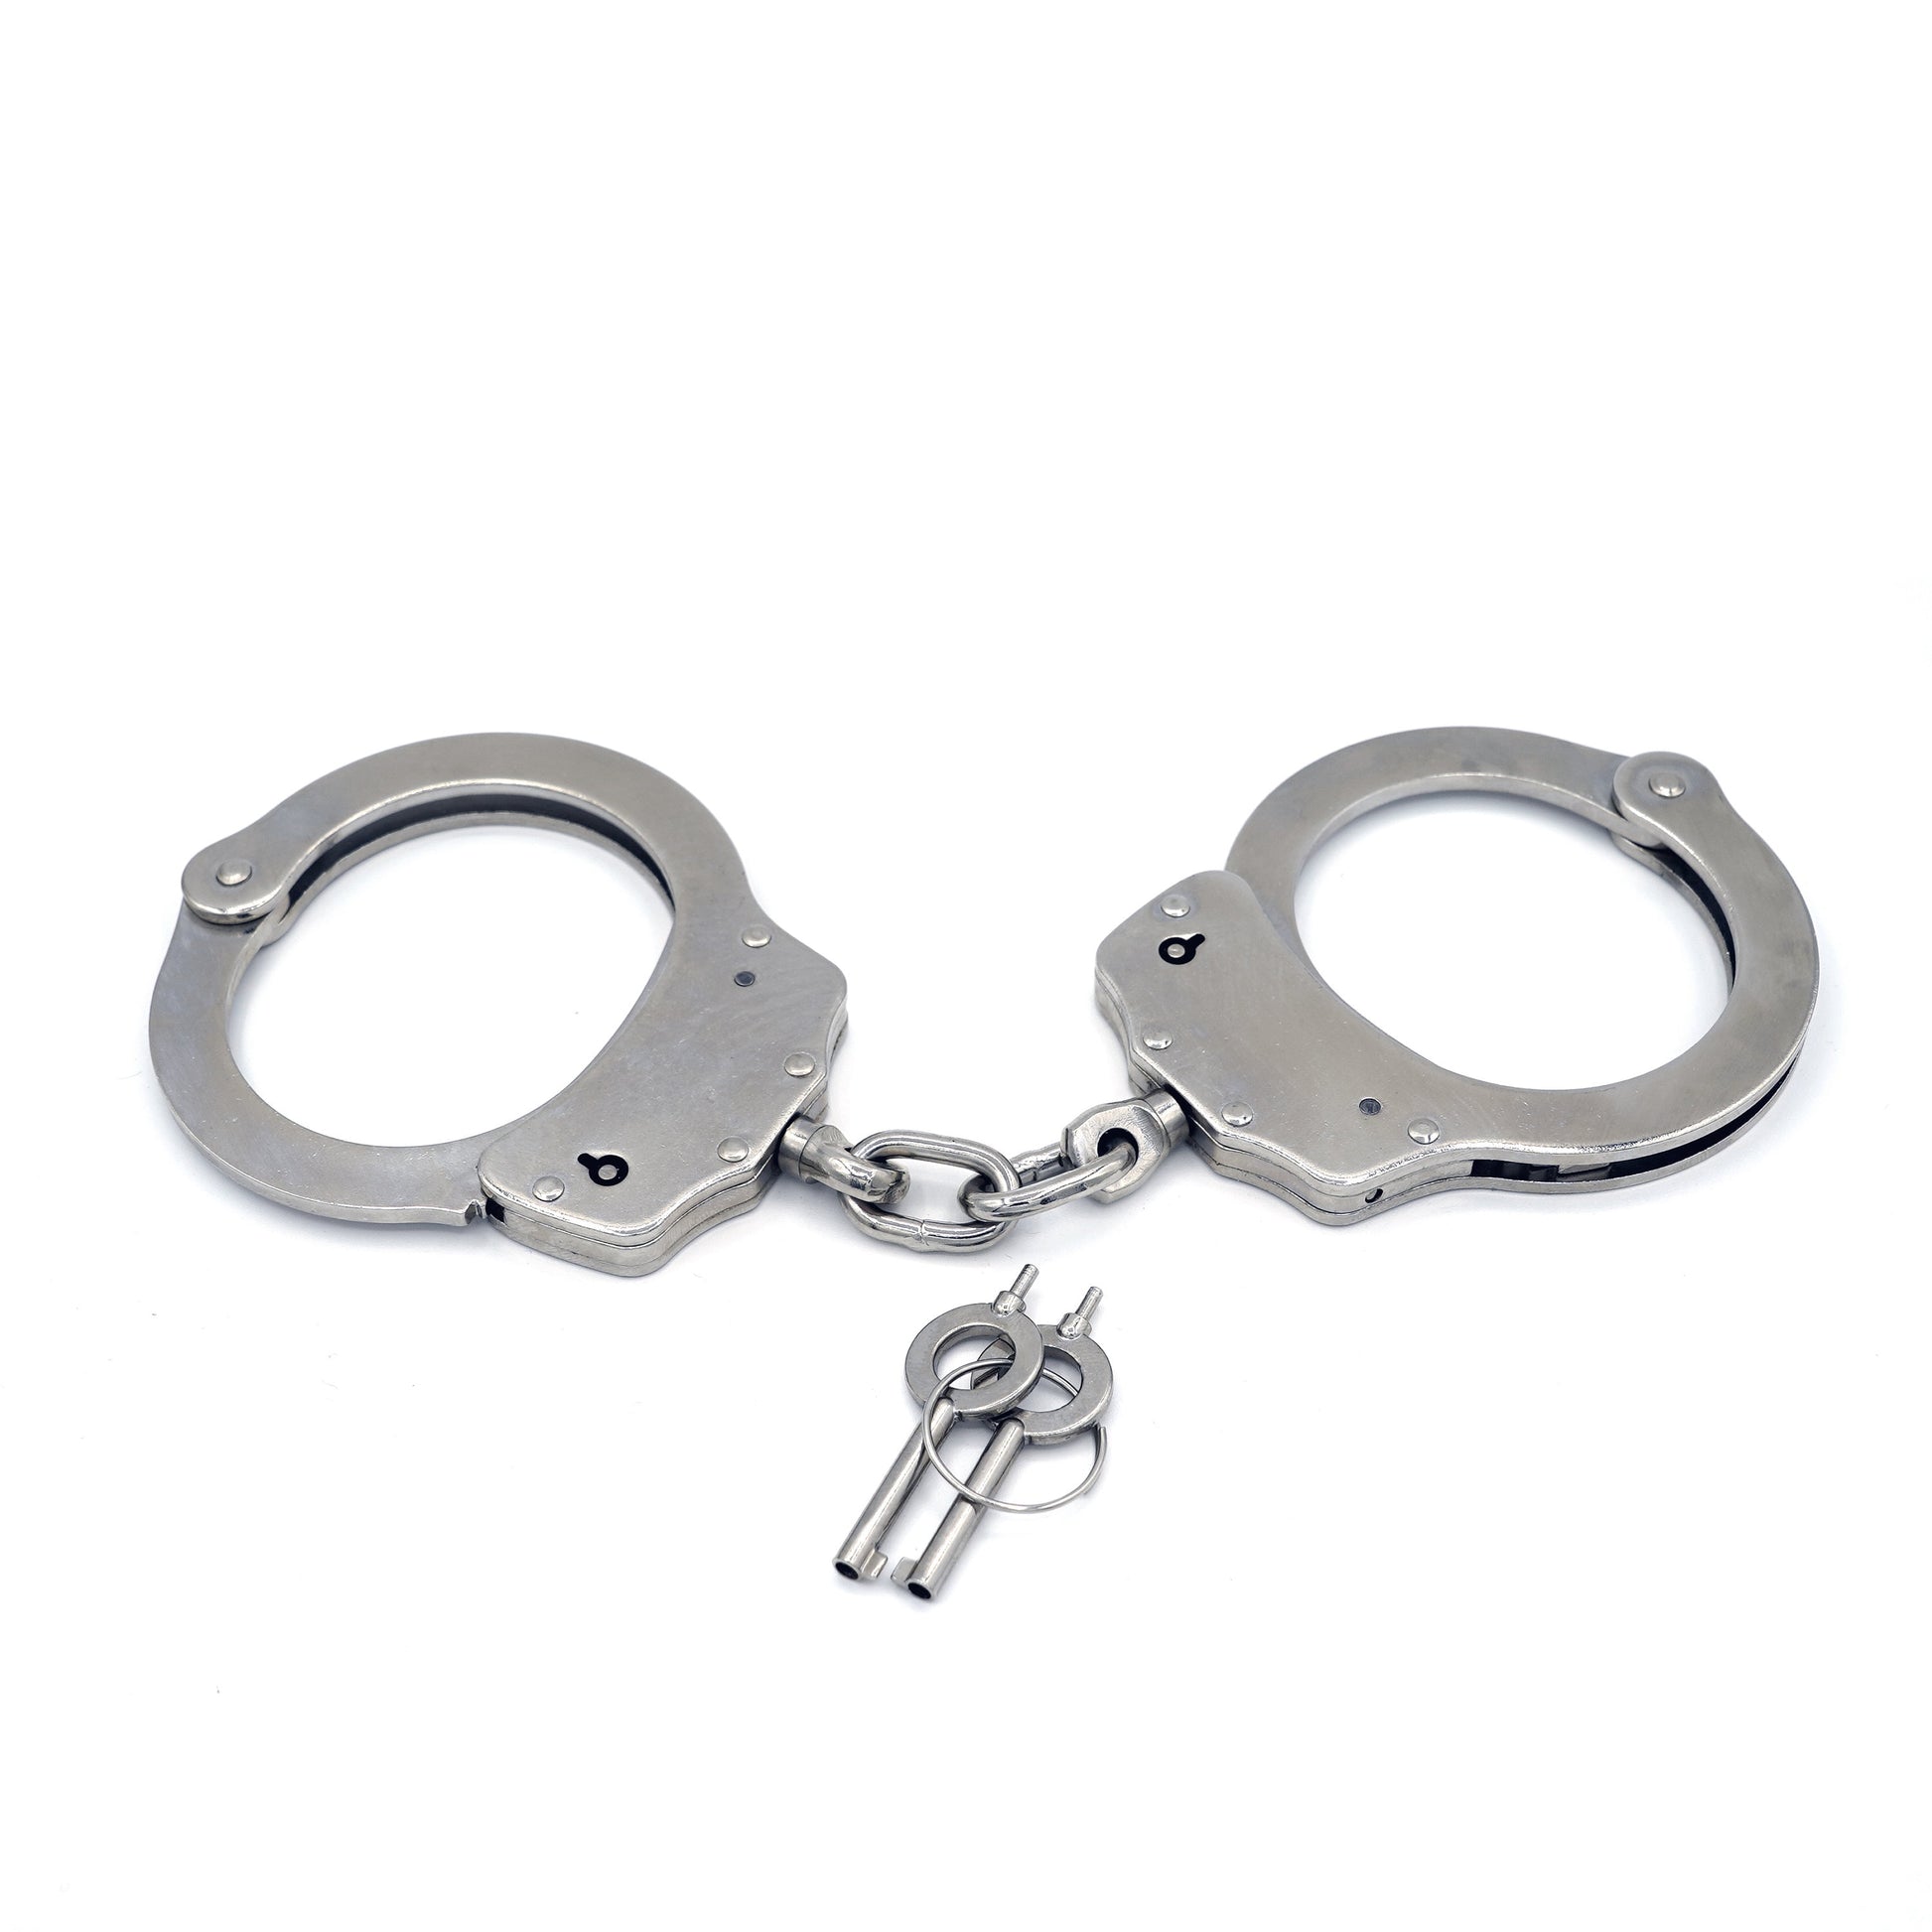 High quality police handcuffs with chain